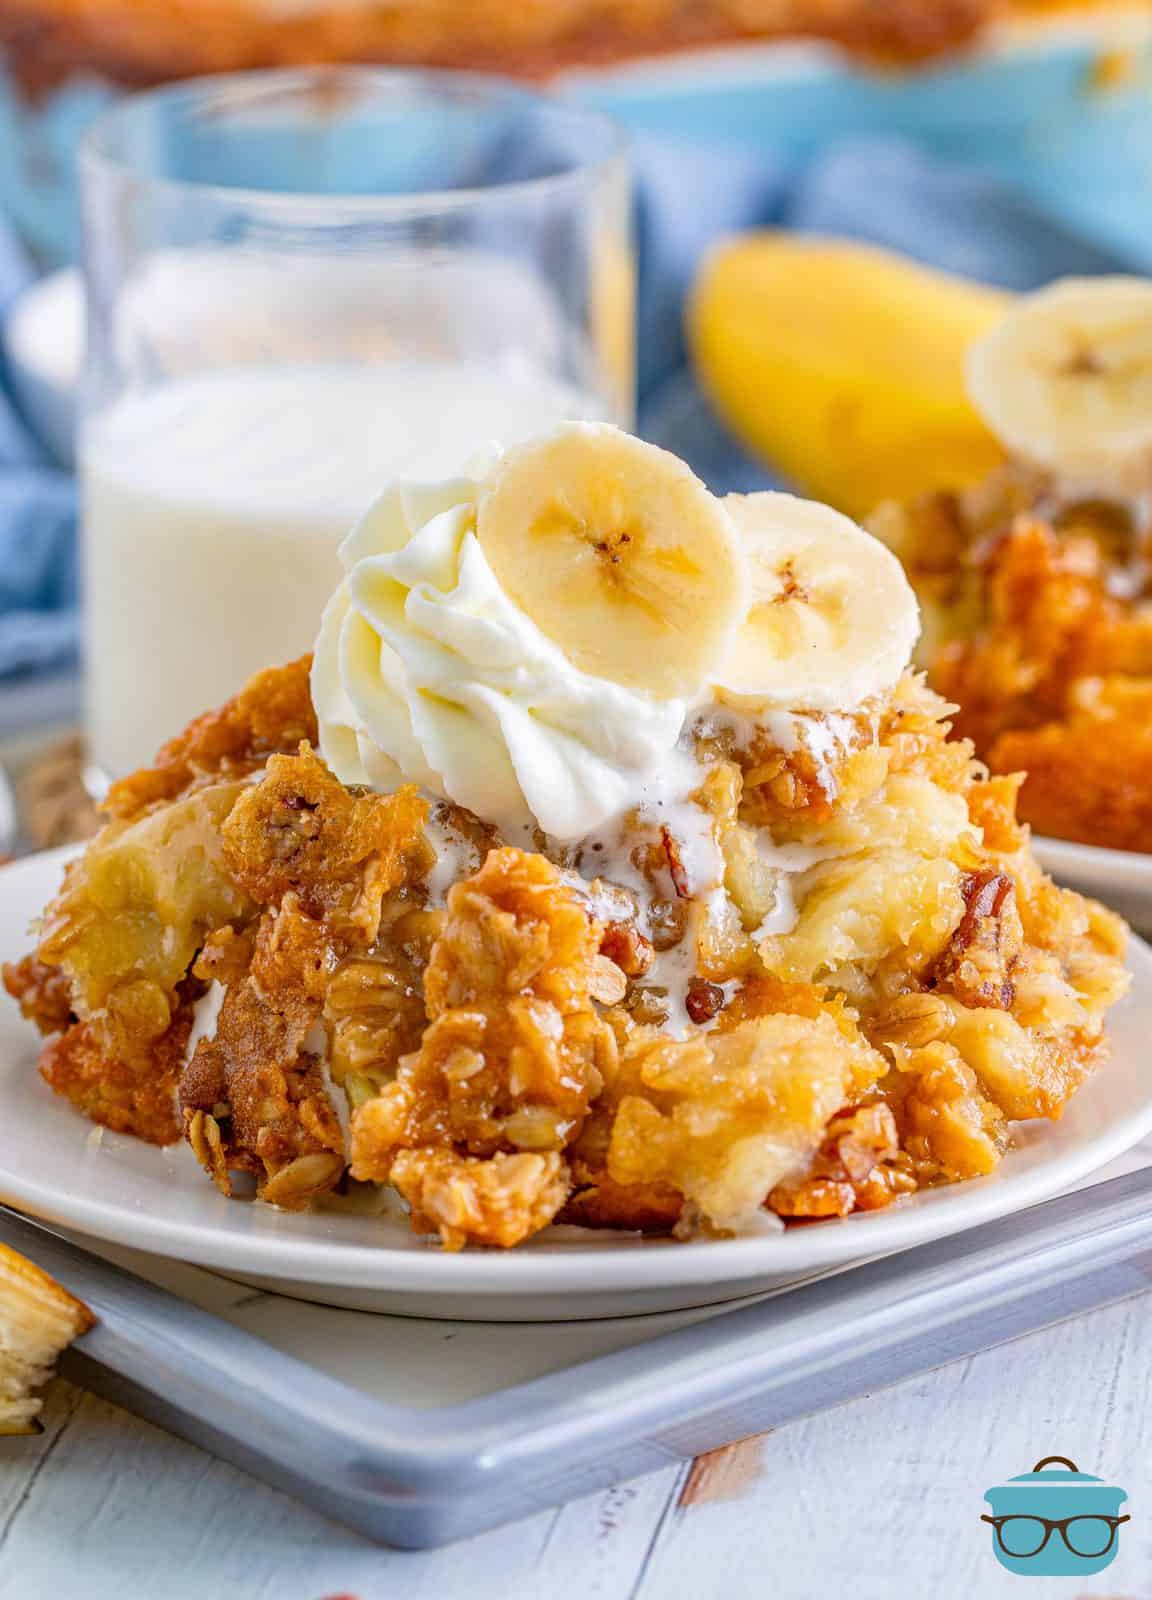 Banana Cobbler serving shown on a white plate and topped with sliced bananas